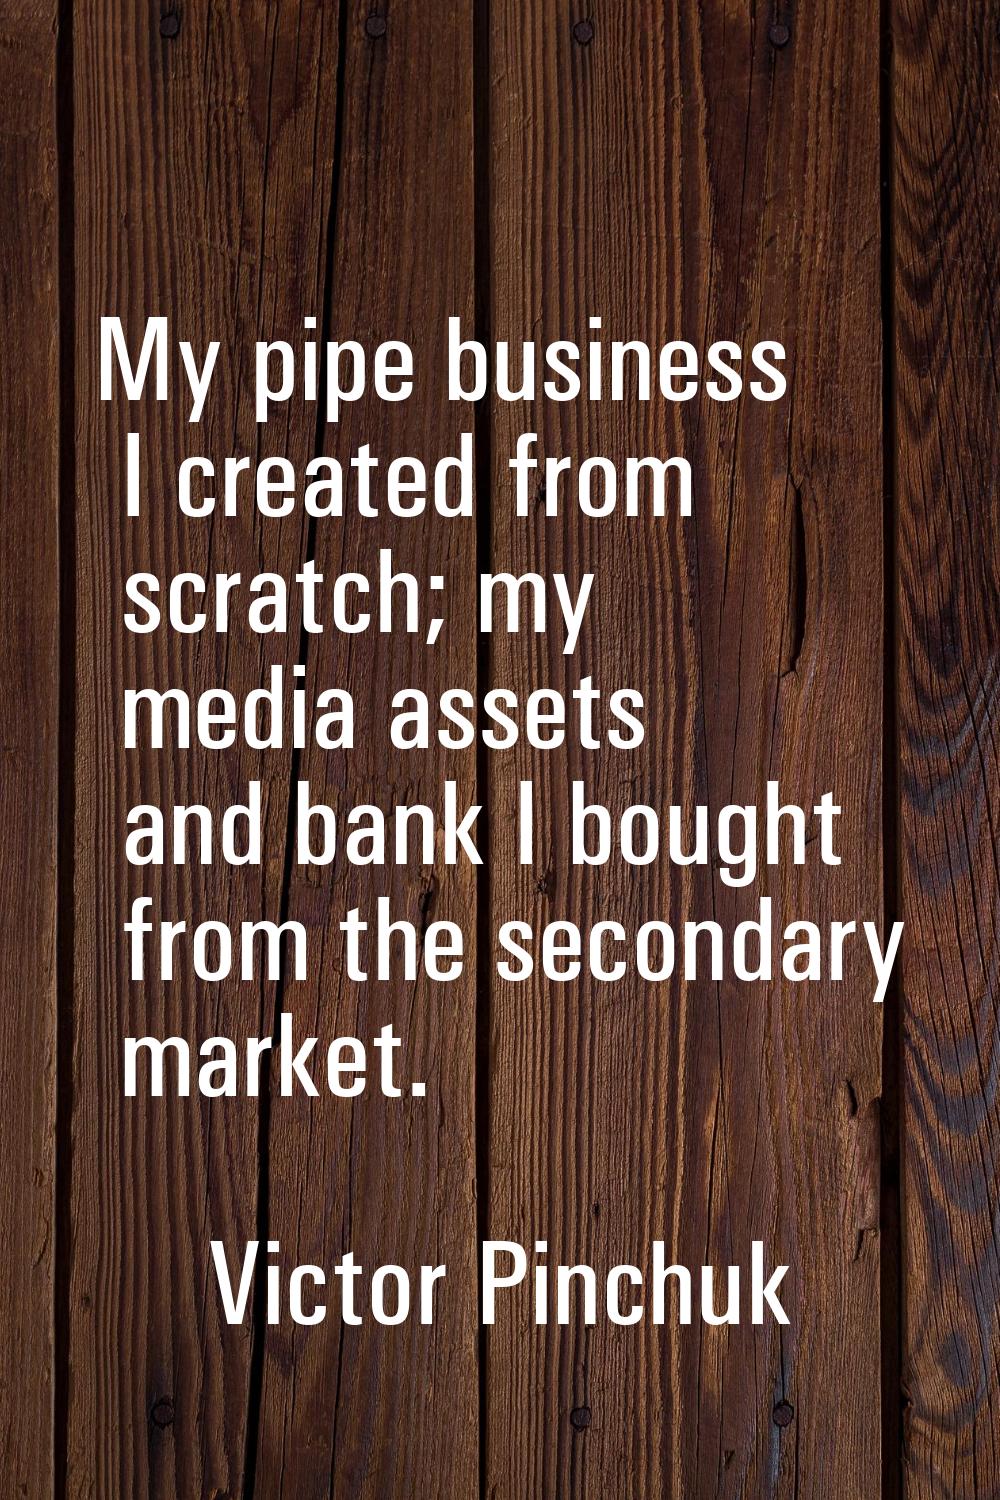 My pipe business I created from scratch; my media assets and bank I bought from the secondary marke